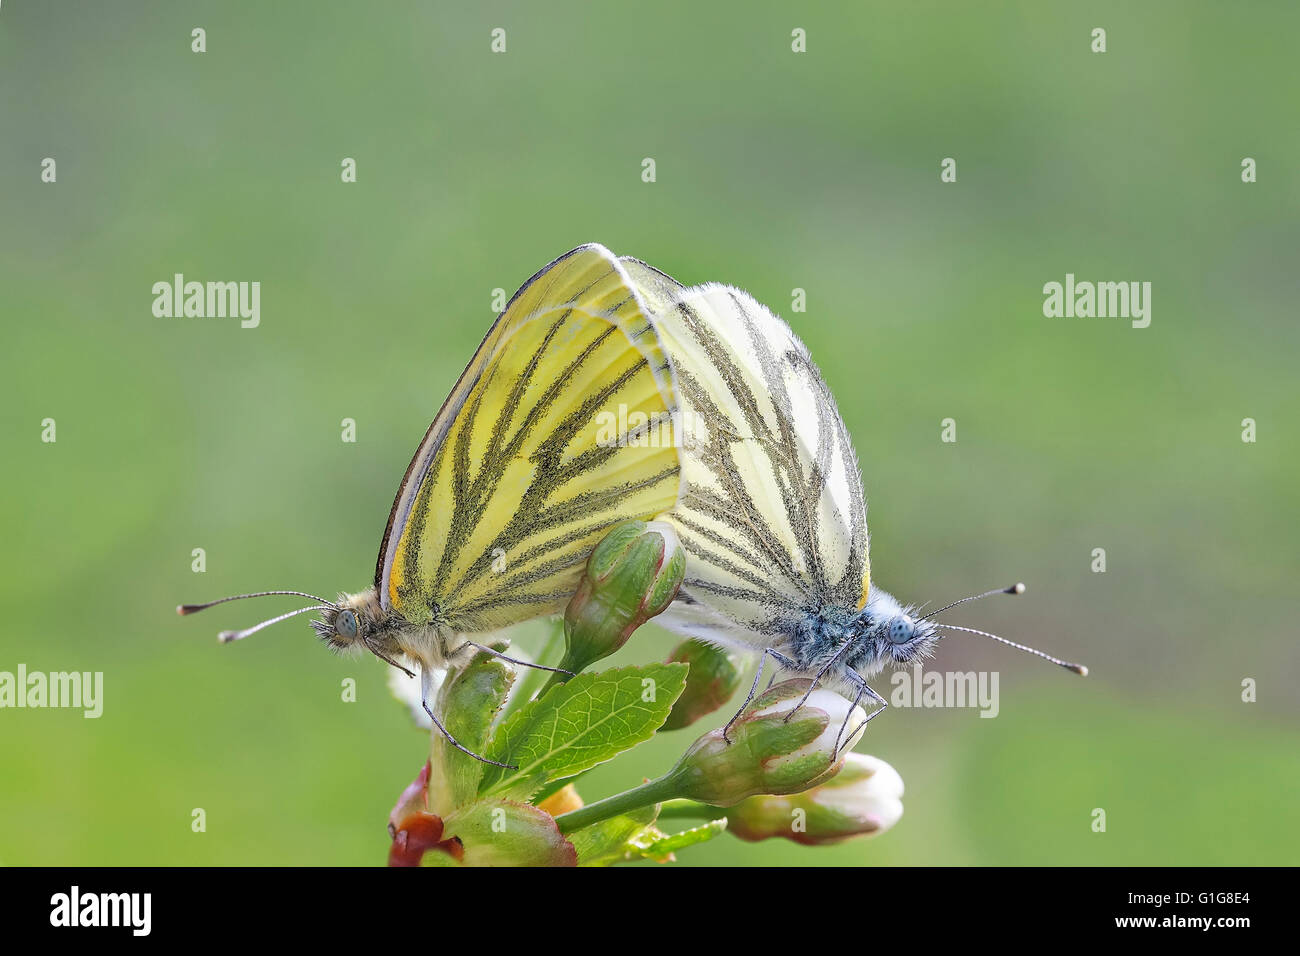 animal, background, beautiful, beauty, blooming, blue, bright, butterfly, care, color, colorful, couple, day, Stock Photo